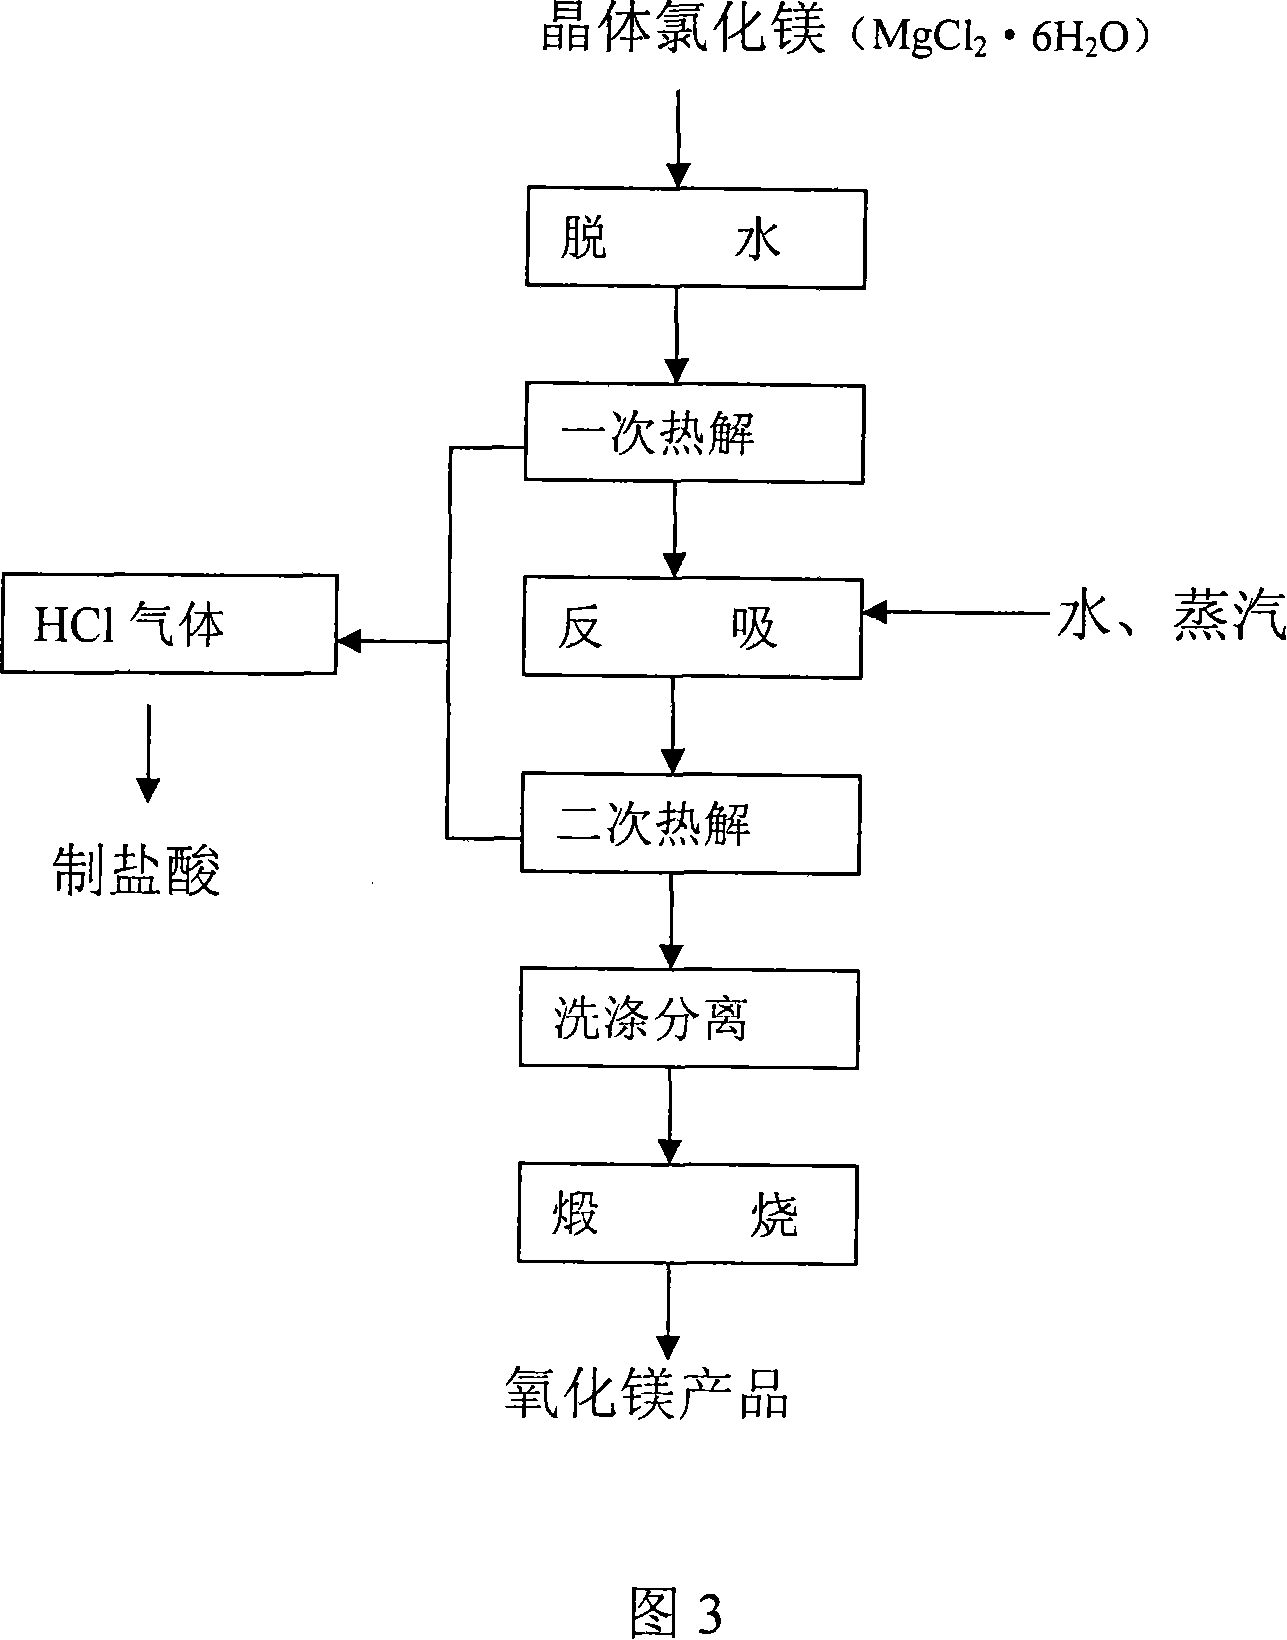 Process for producing high-purity magnesium oxide and lithium salt by using salt lake old brine